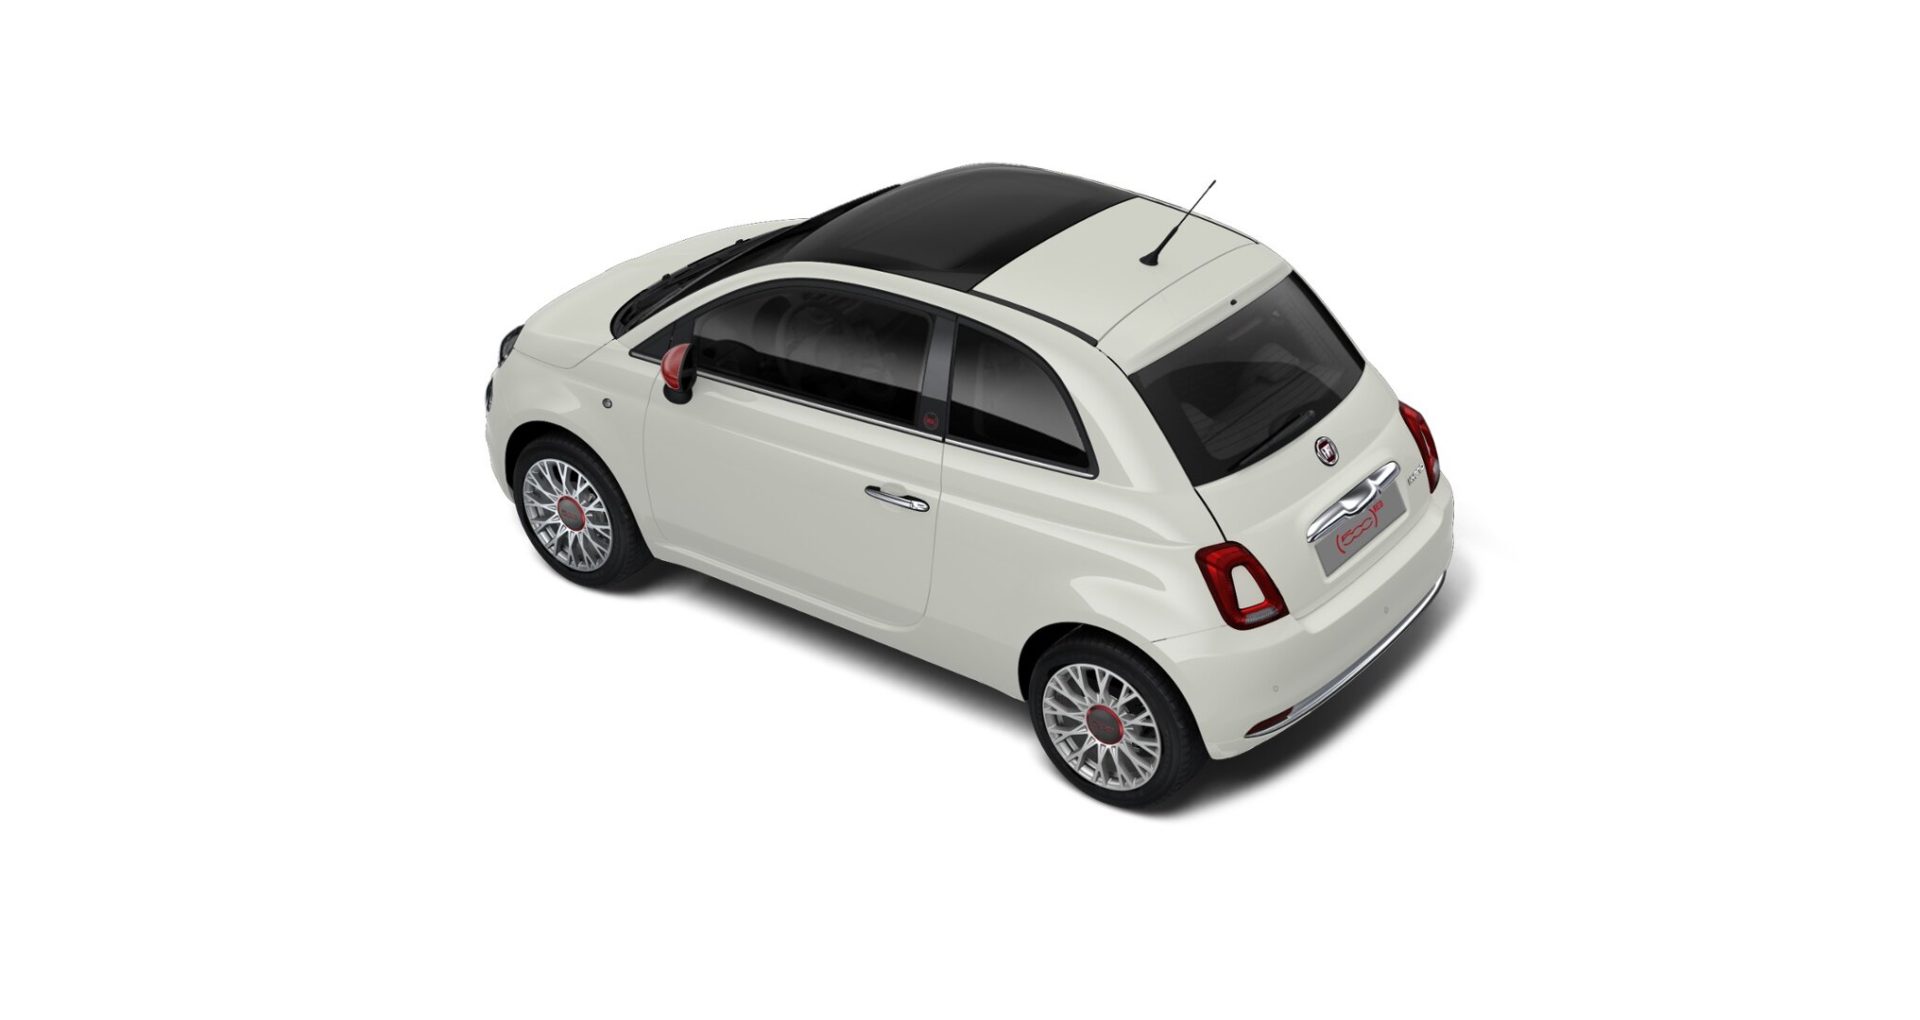 Renting Fiat 500 Hatchback Red Blanco Compacto Manual ECO Renting Finders